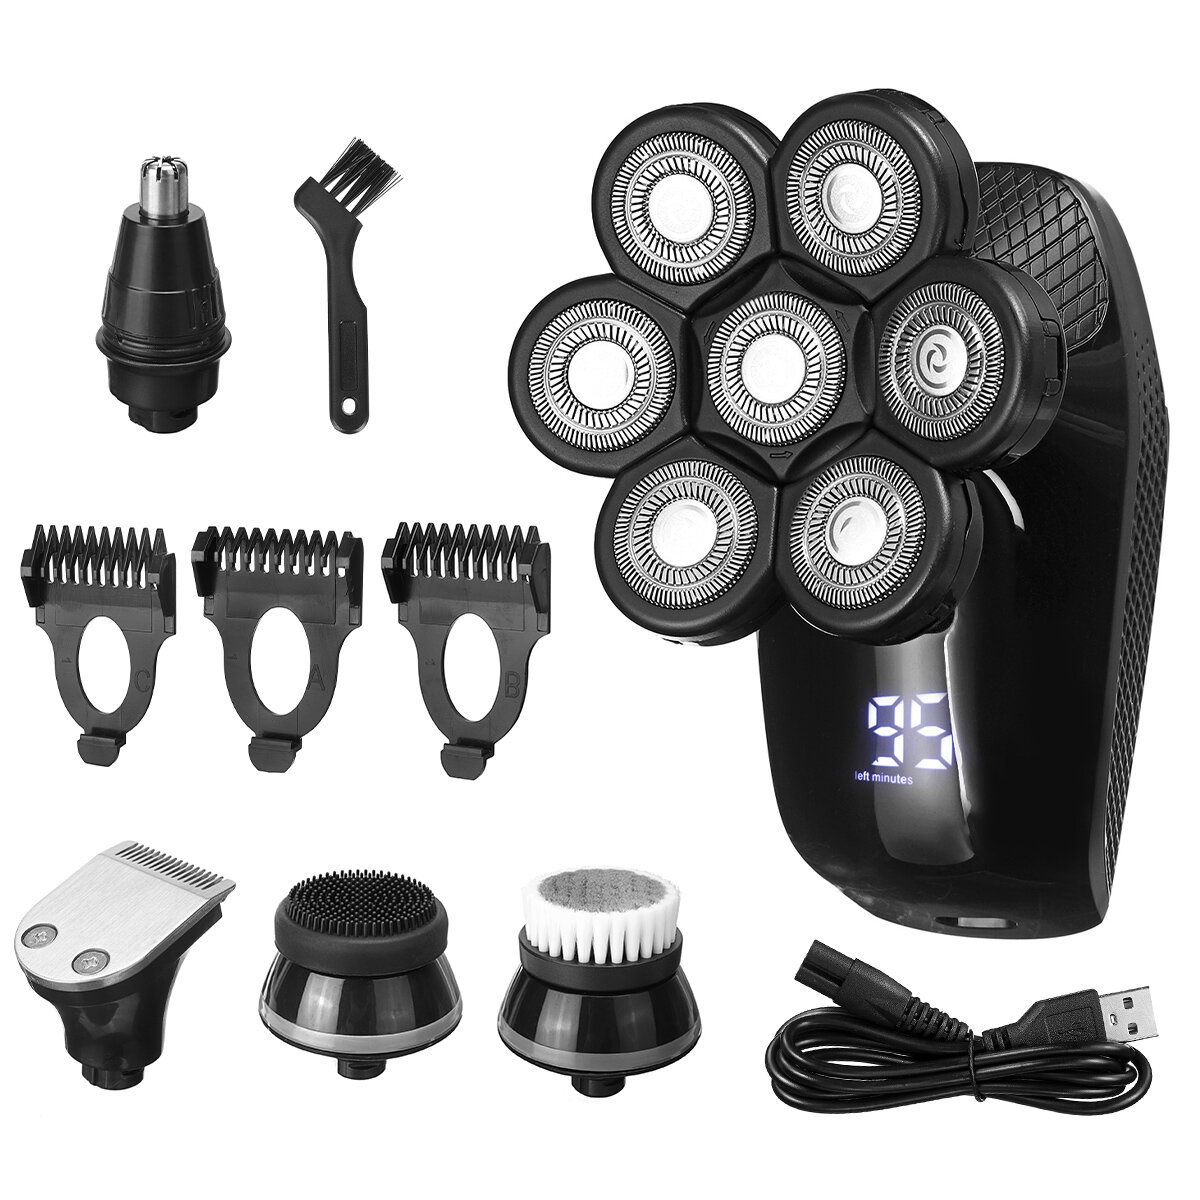 7D Floating Head Electric Shaver LED Display IPX6 Waterproof Electric Shaver Cordless Rechargeable Self-service Hair Mac